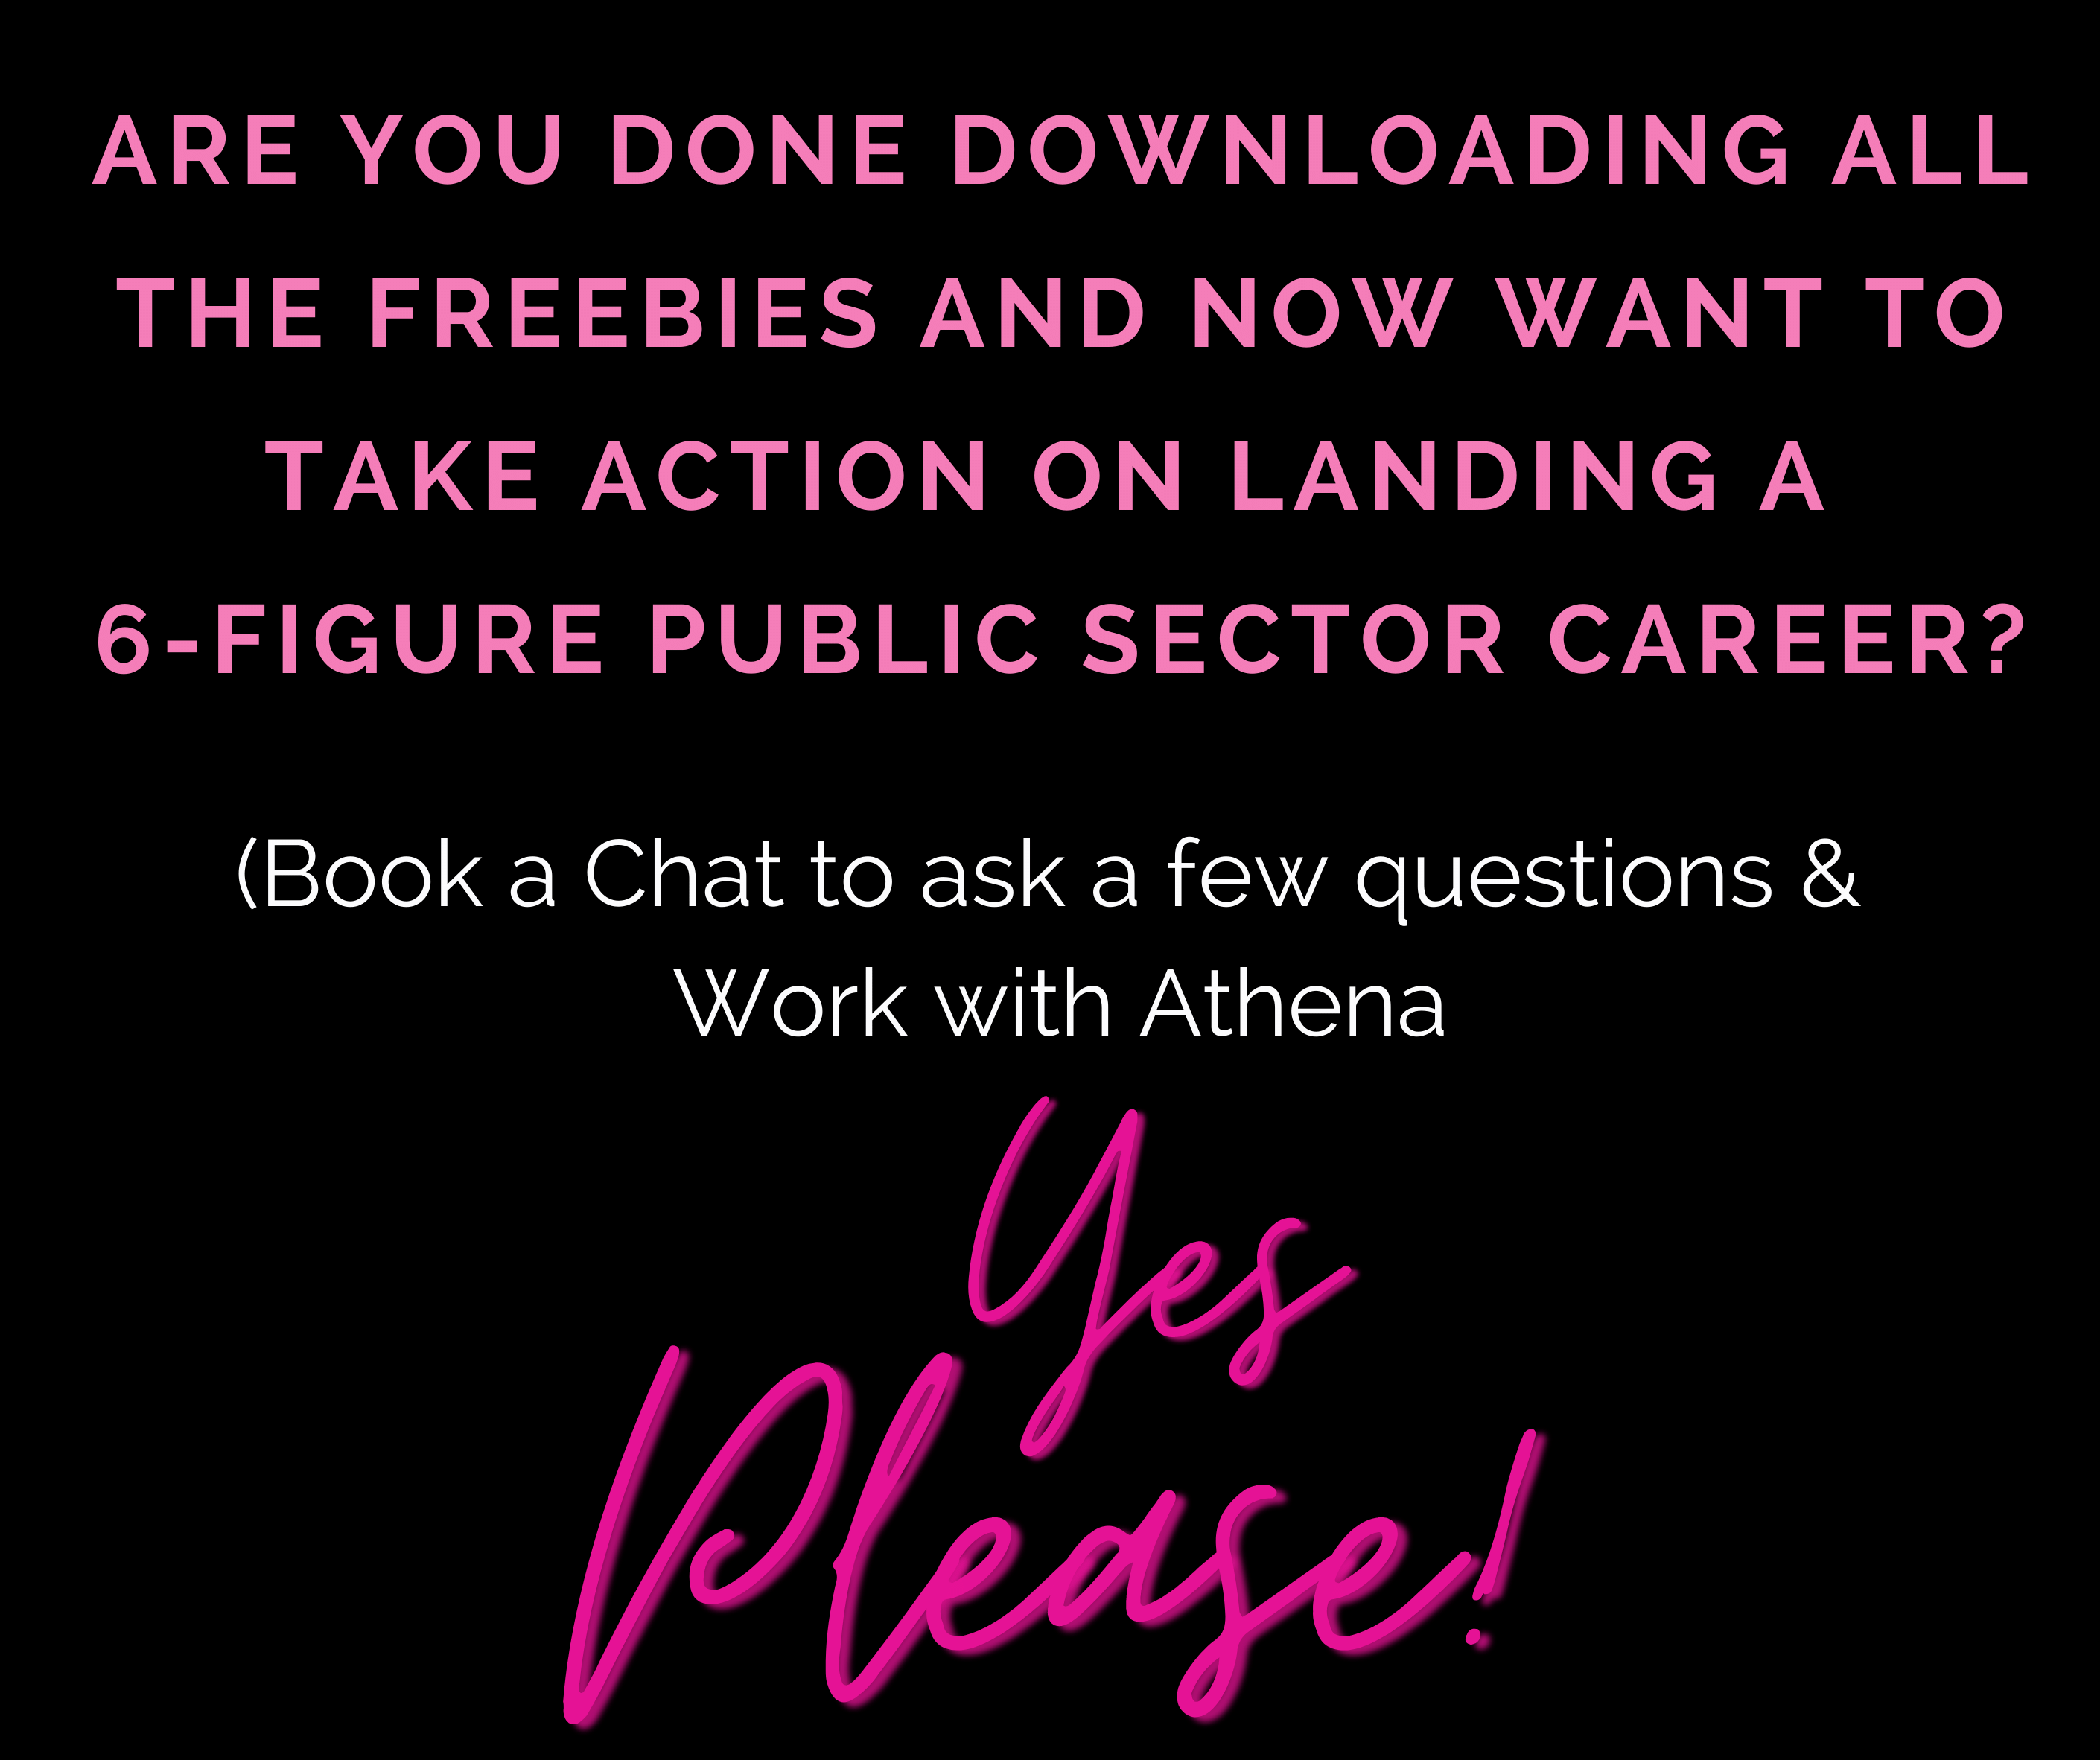 are you done downloading all the freebies - book a chat and work with athena